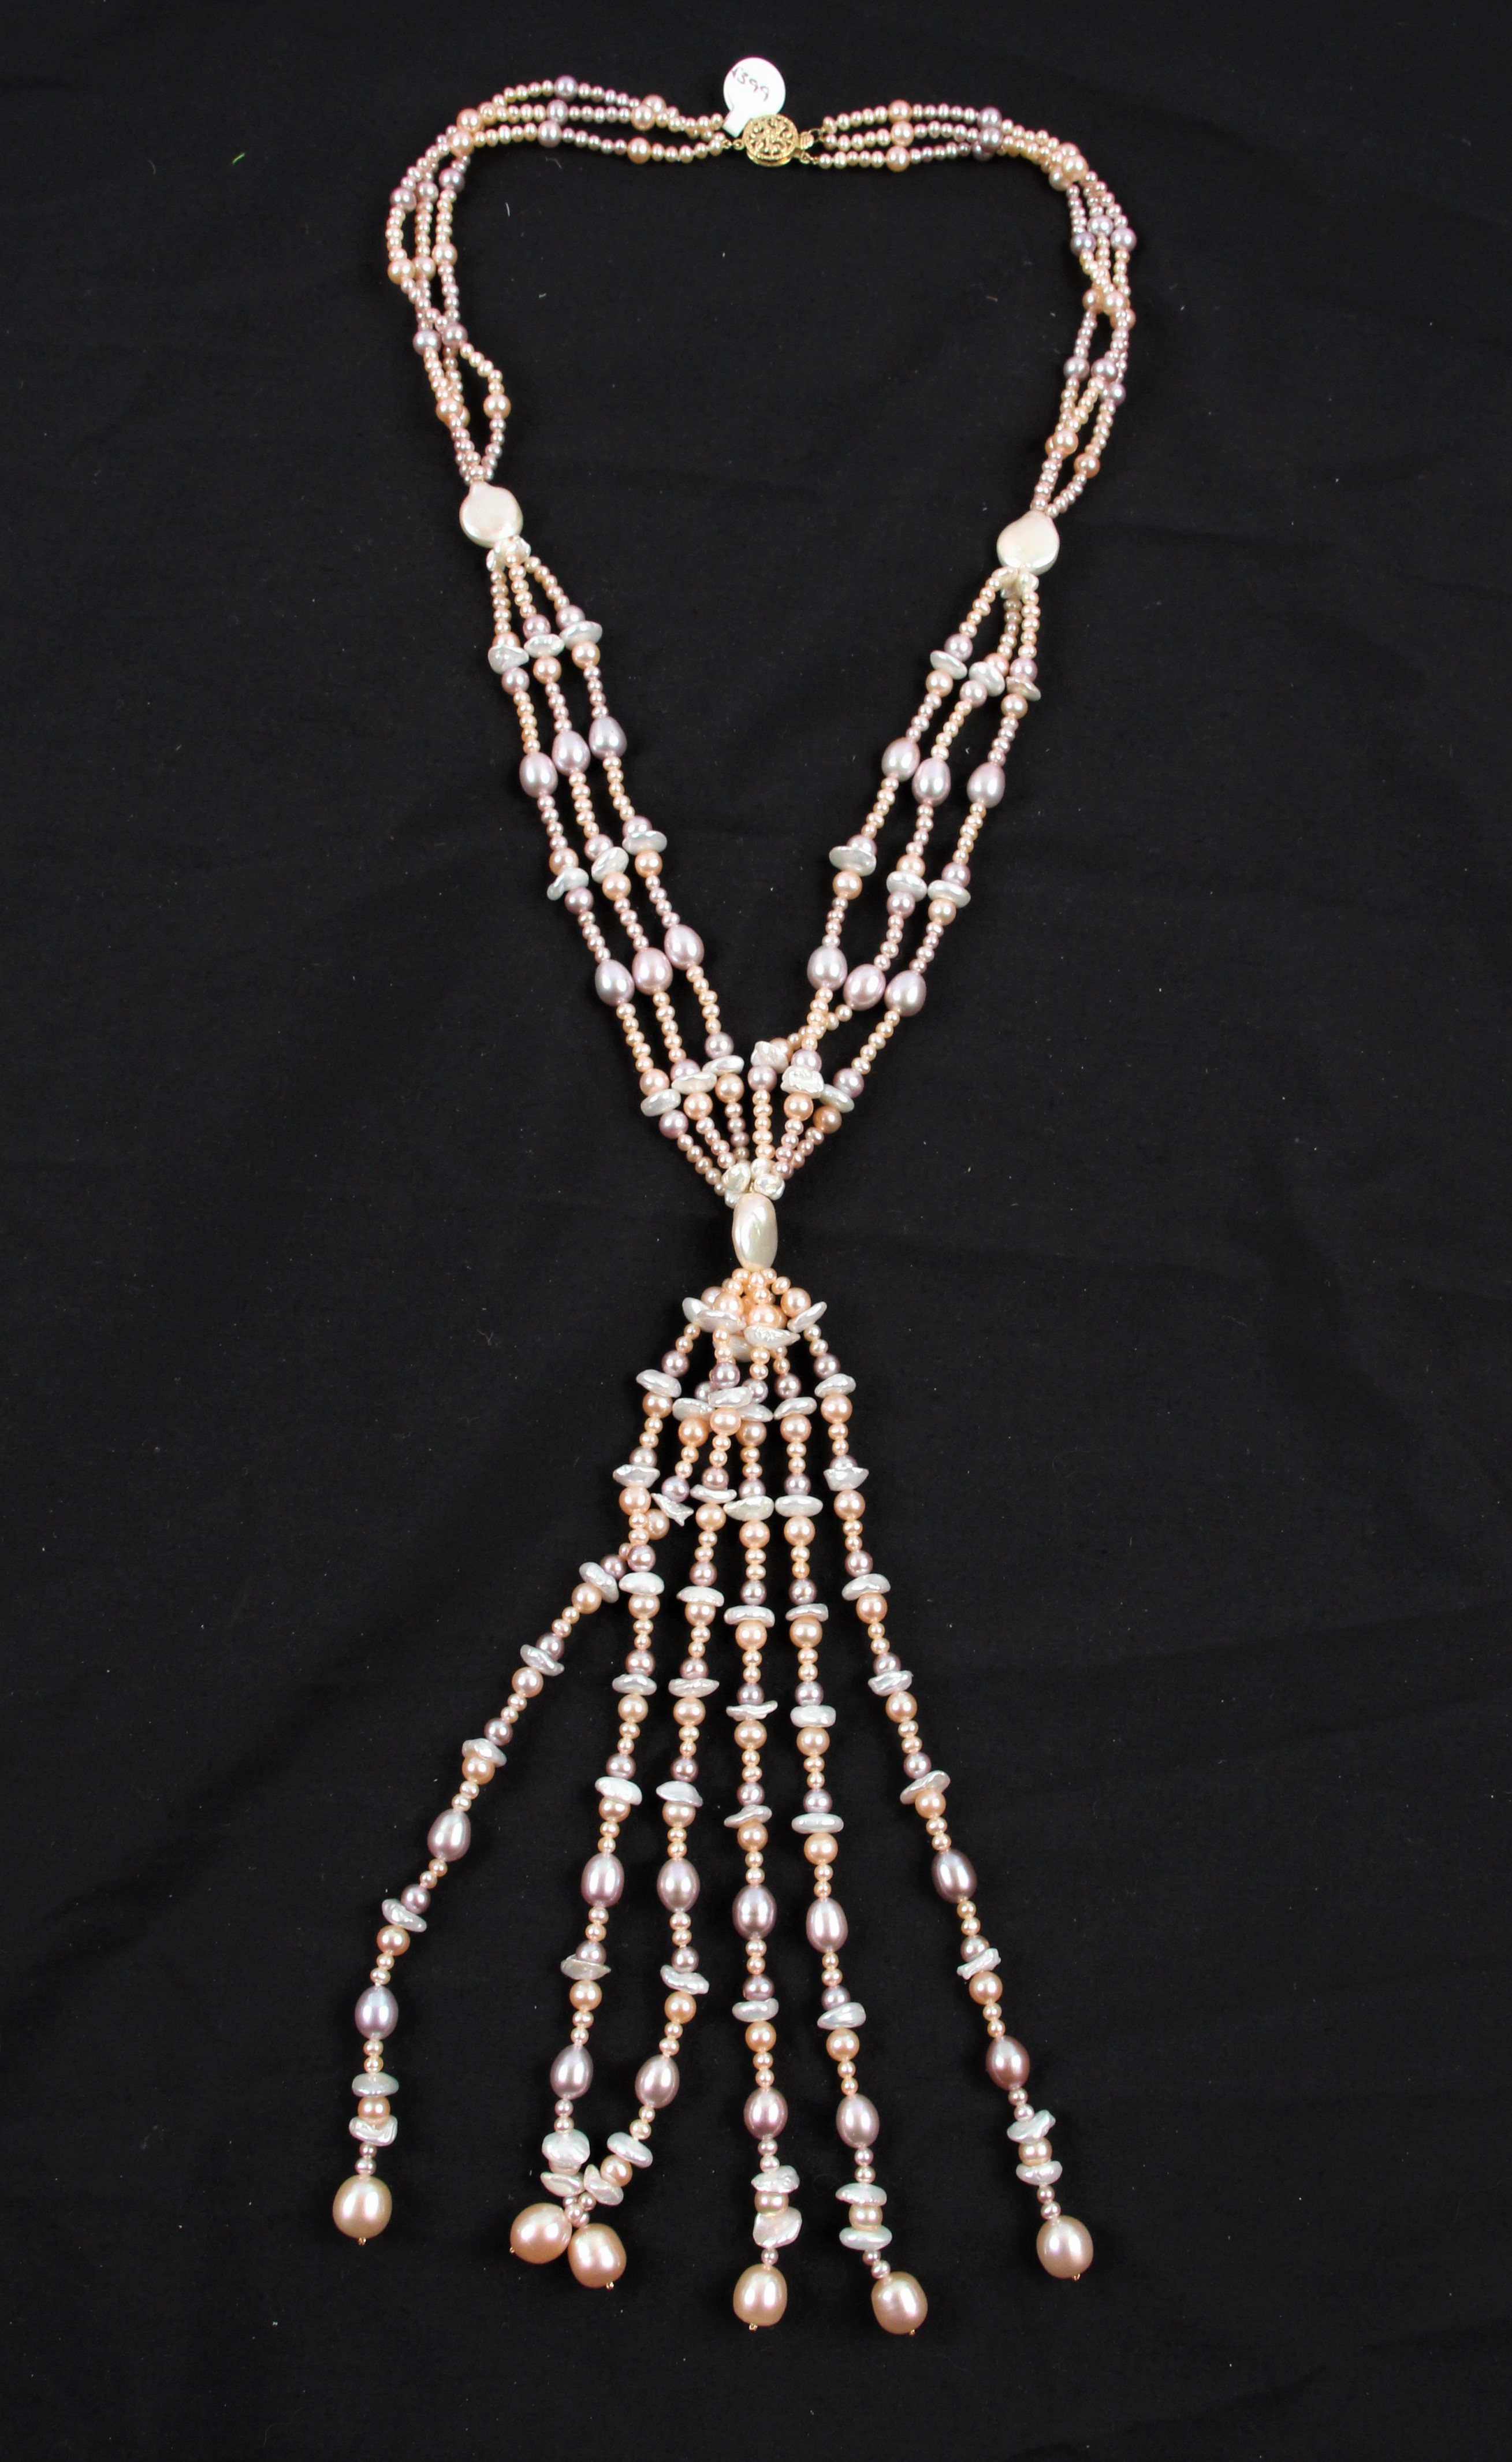 A triple strand string of cultured pearls in gathered design, comprising white, peach and